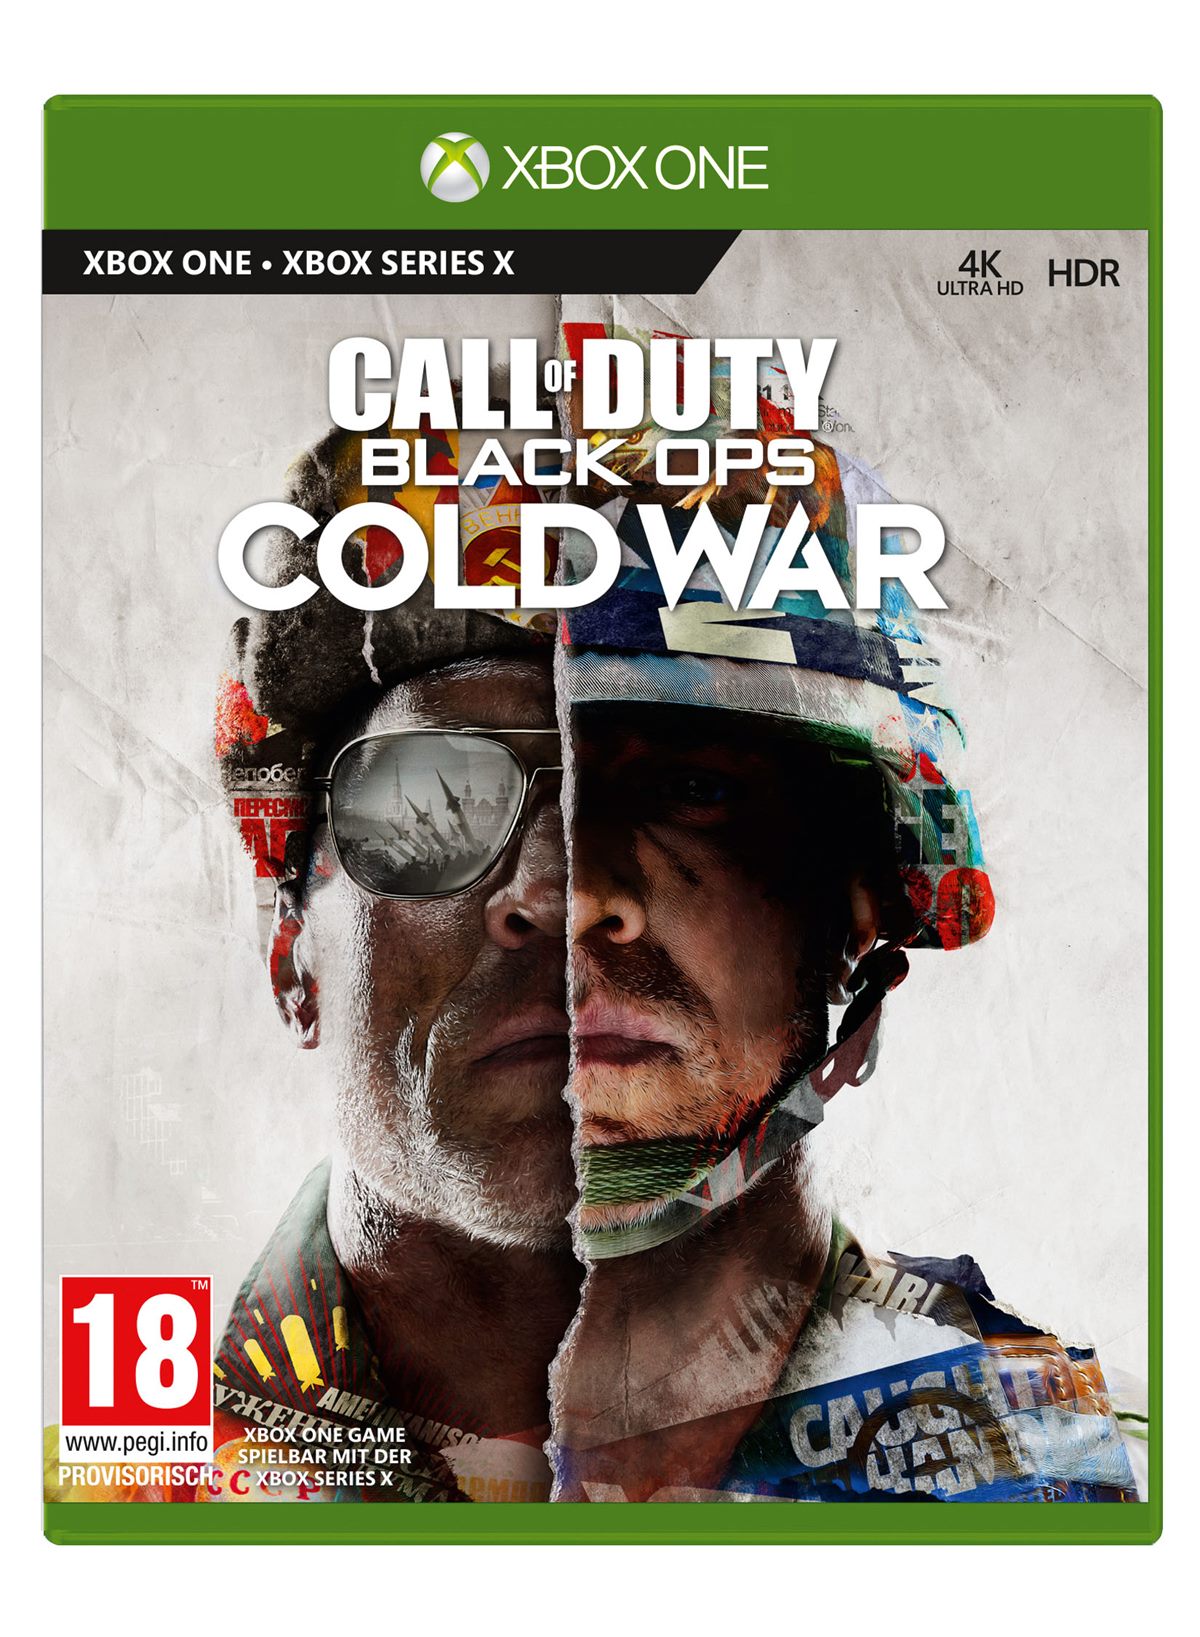 LIBRO_Call of Duty Black Ops Cold War_XBO_€ 69,99